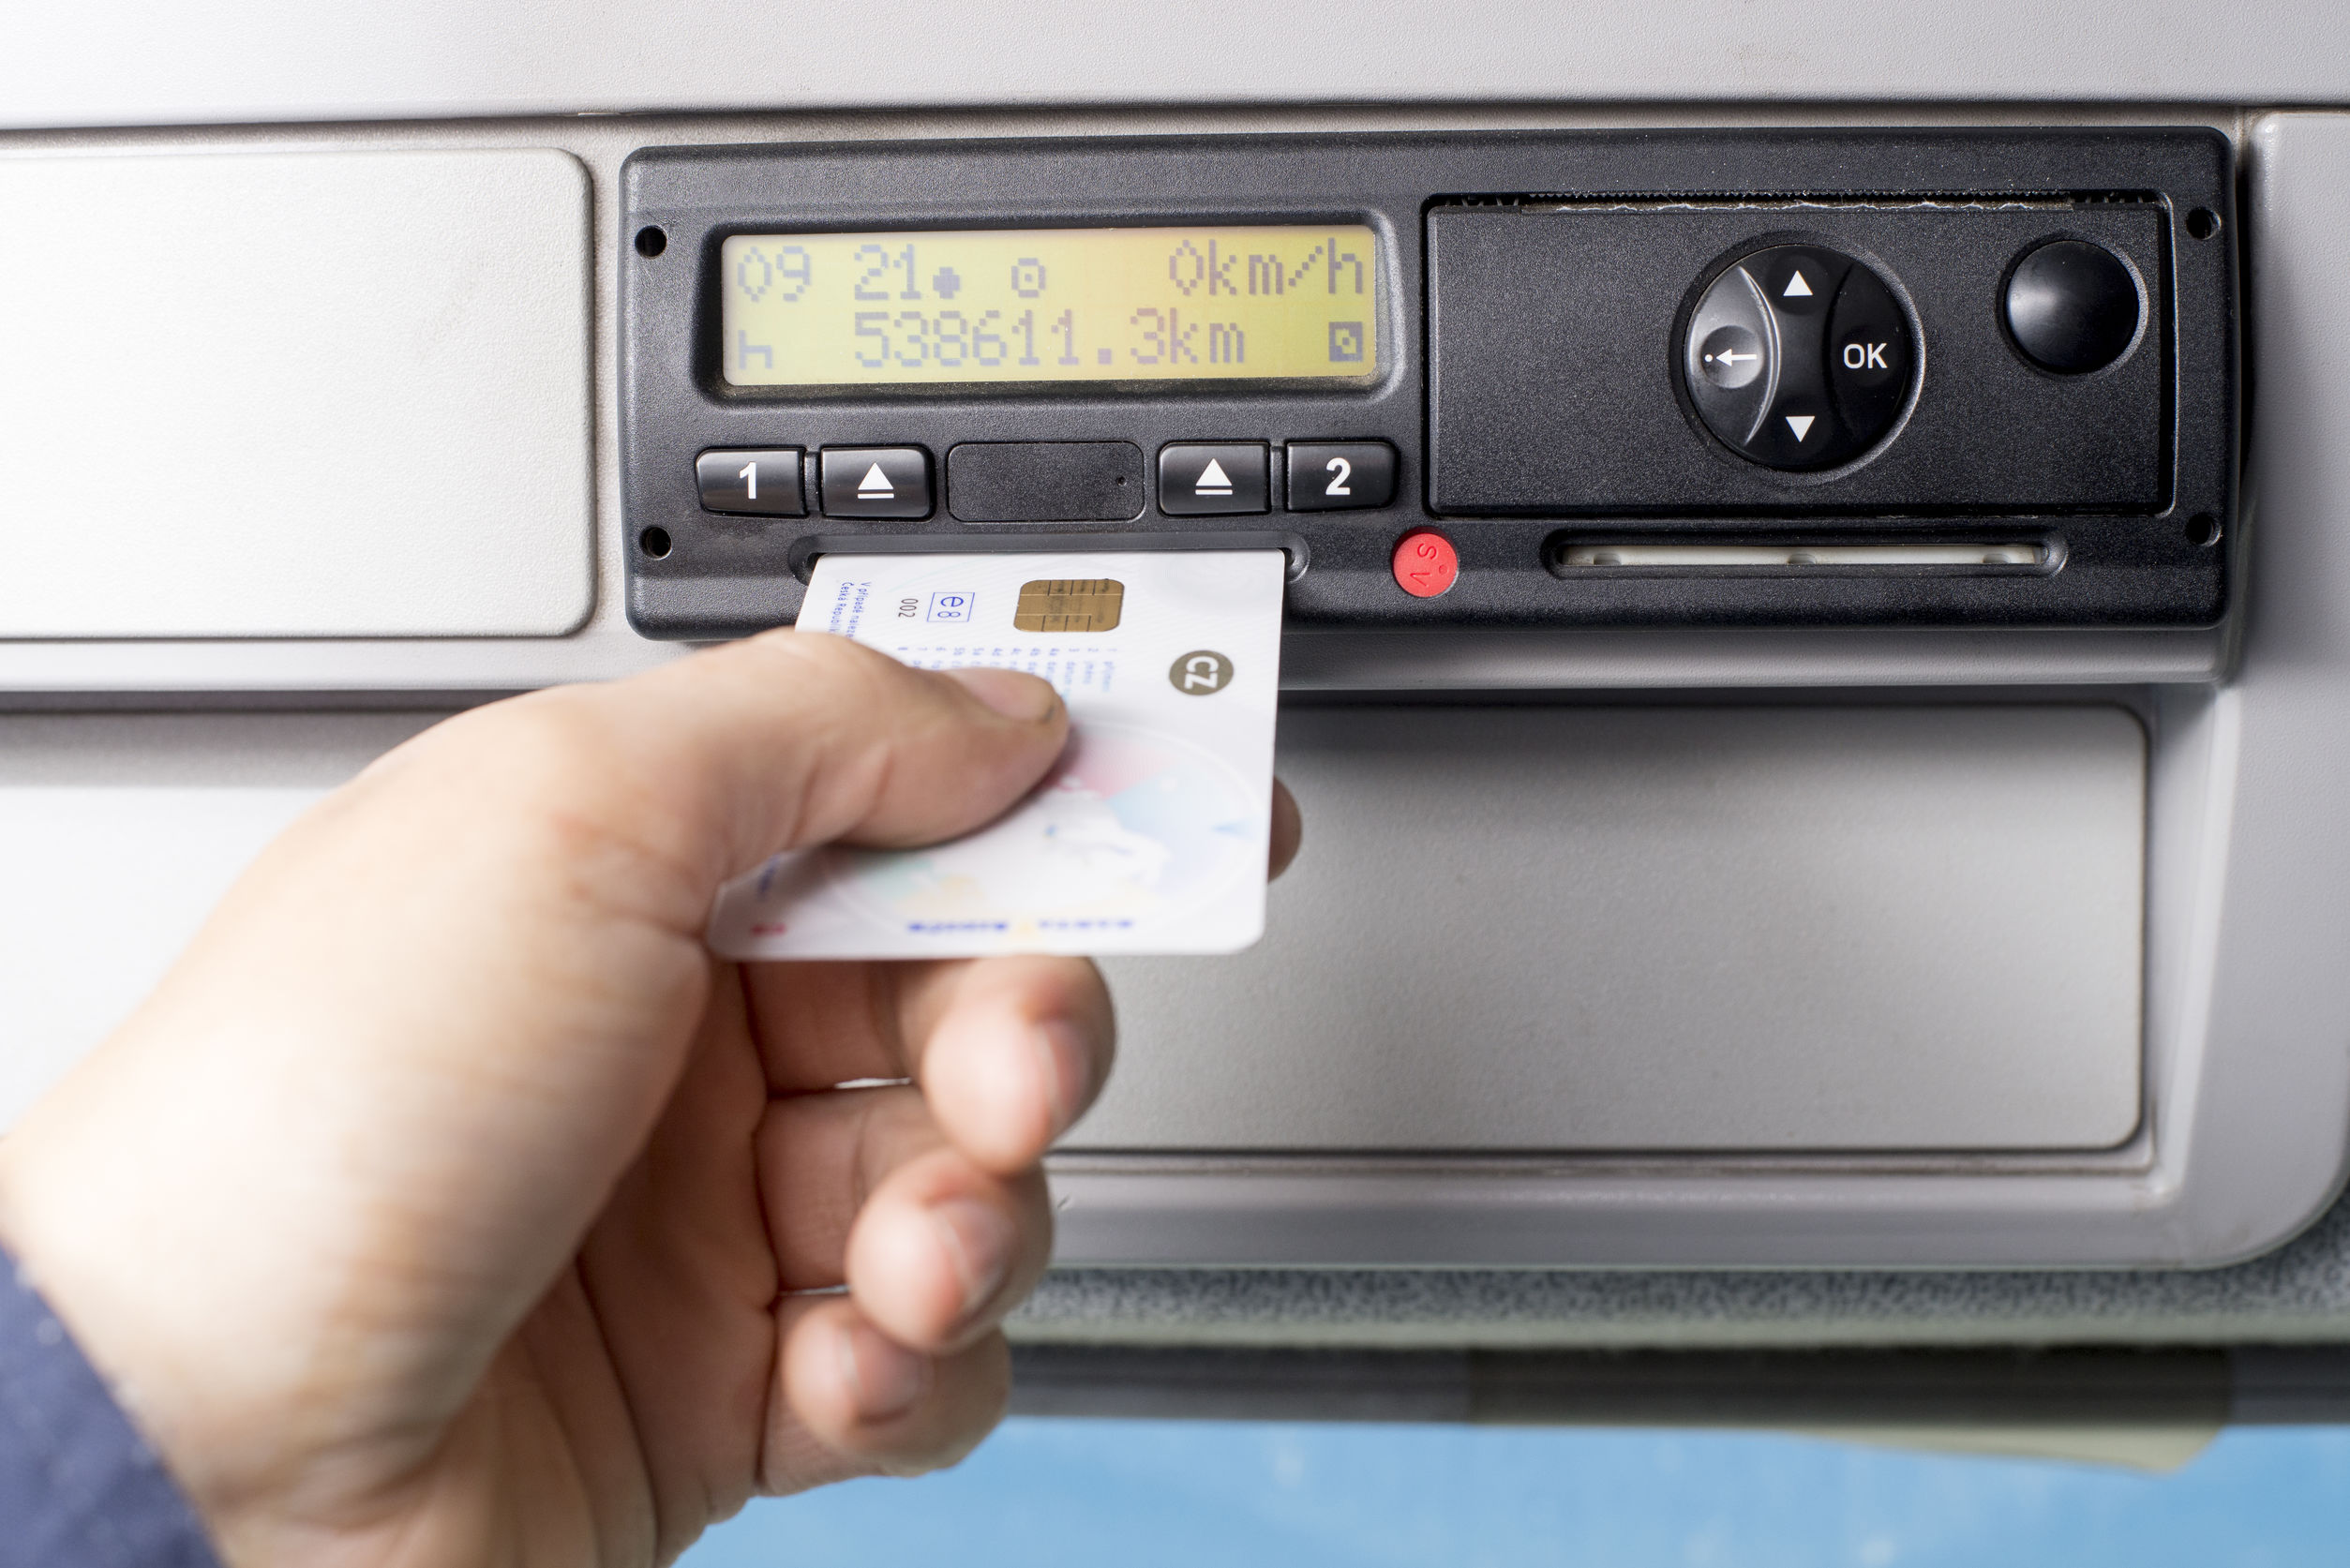 Digital tachograph and drivers hand inserting the digital card